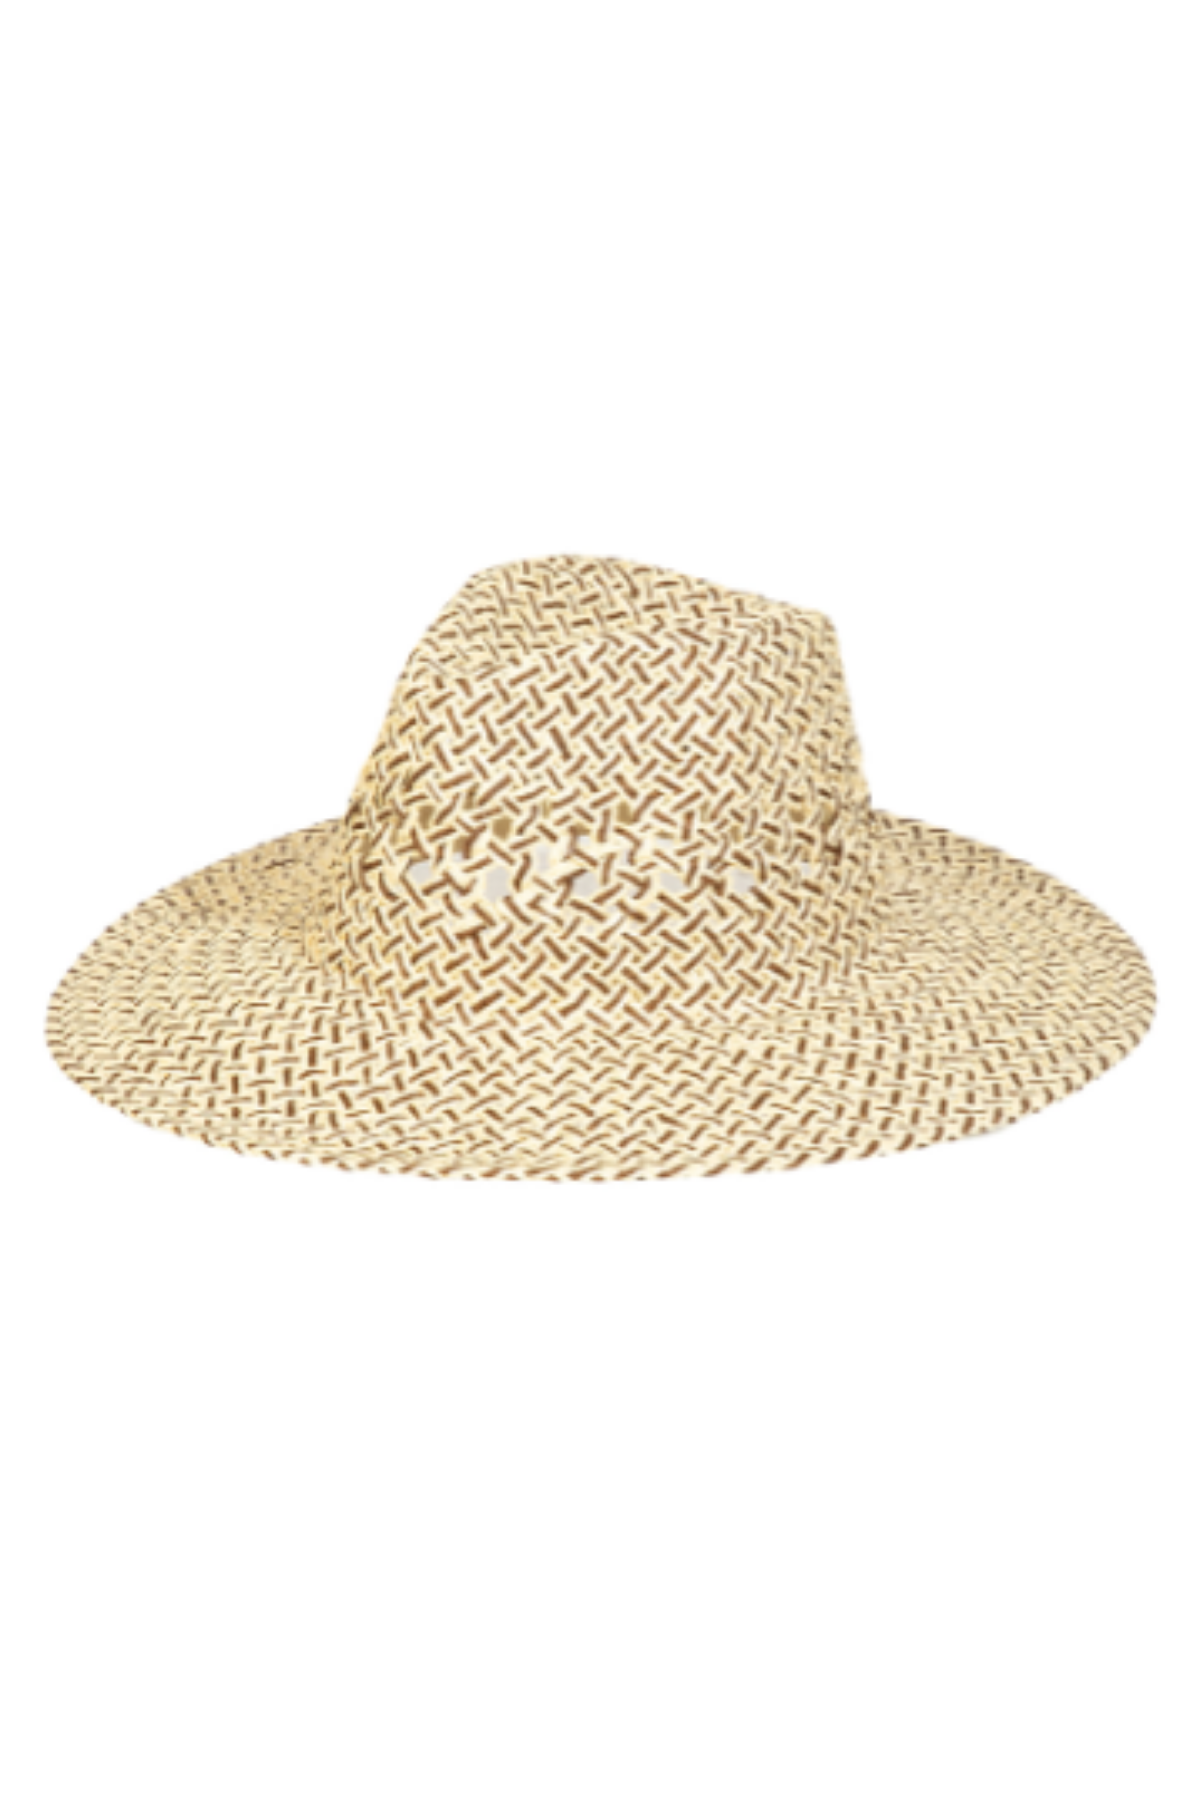 Two Tone Woven Hat